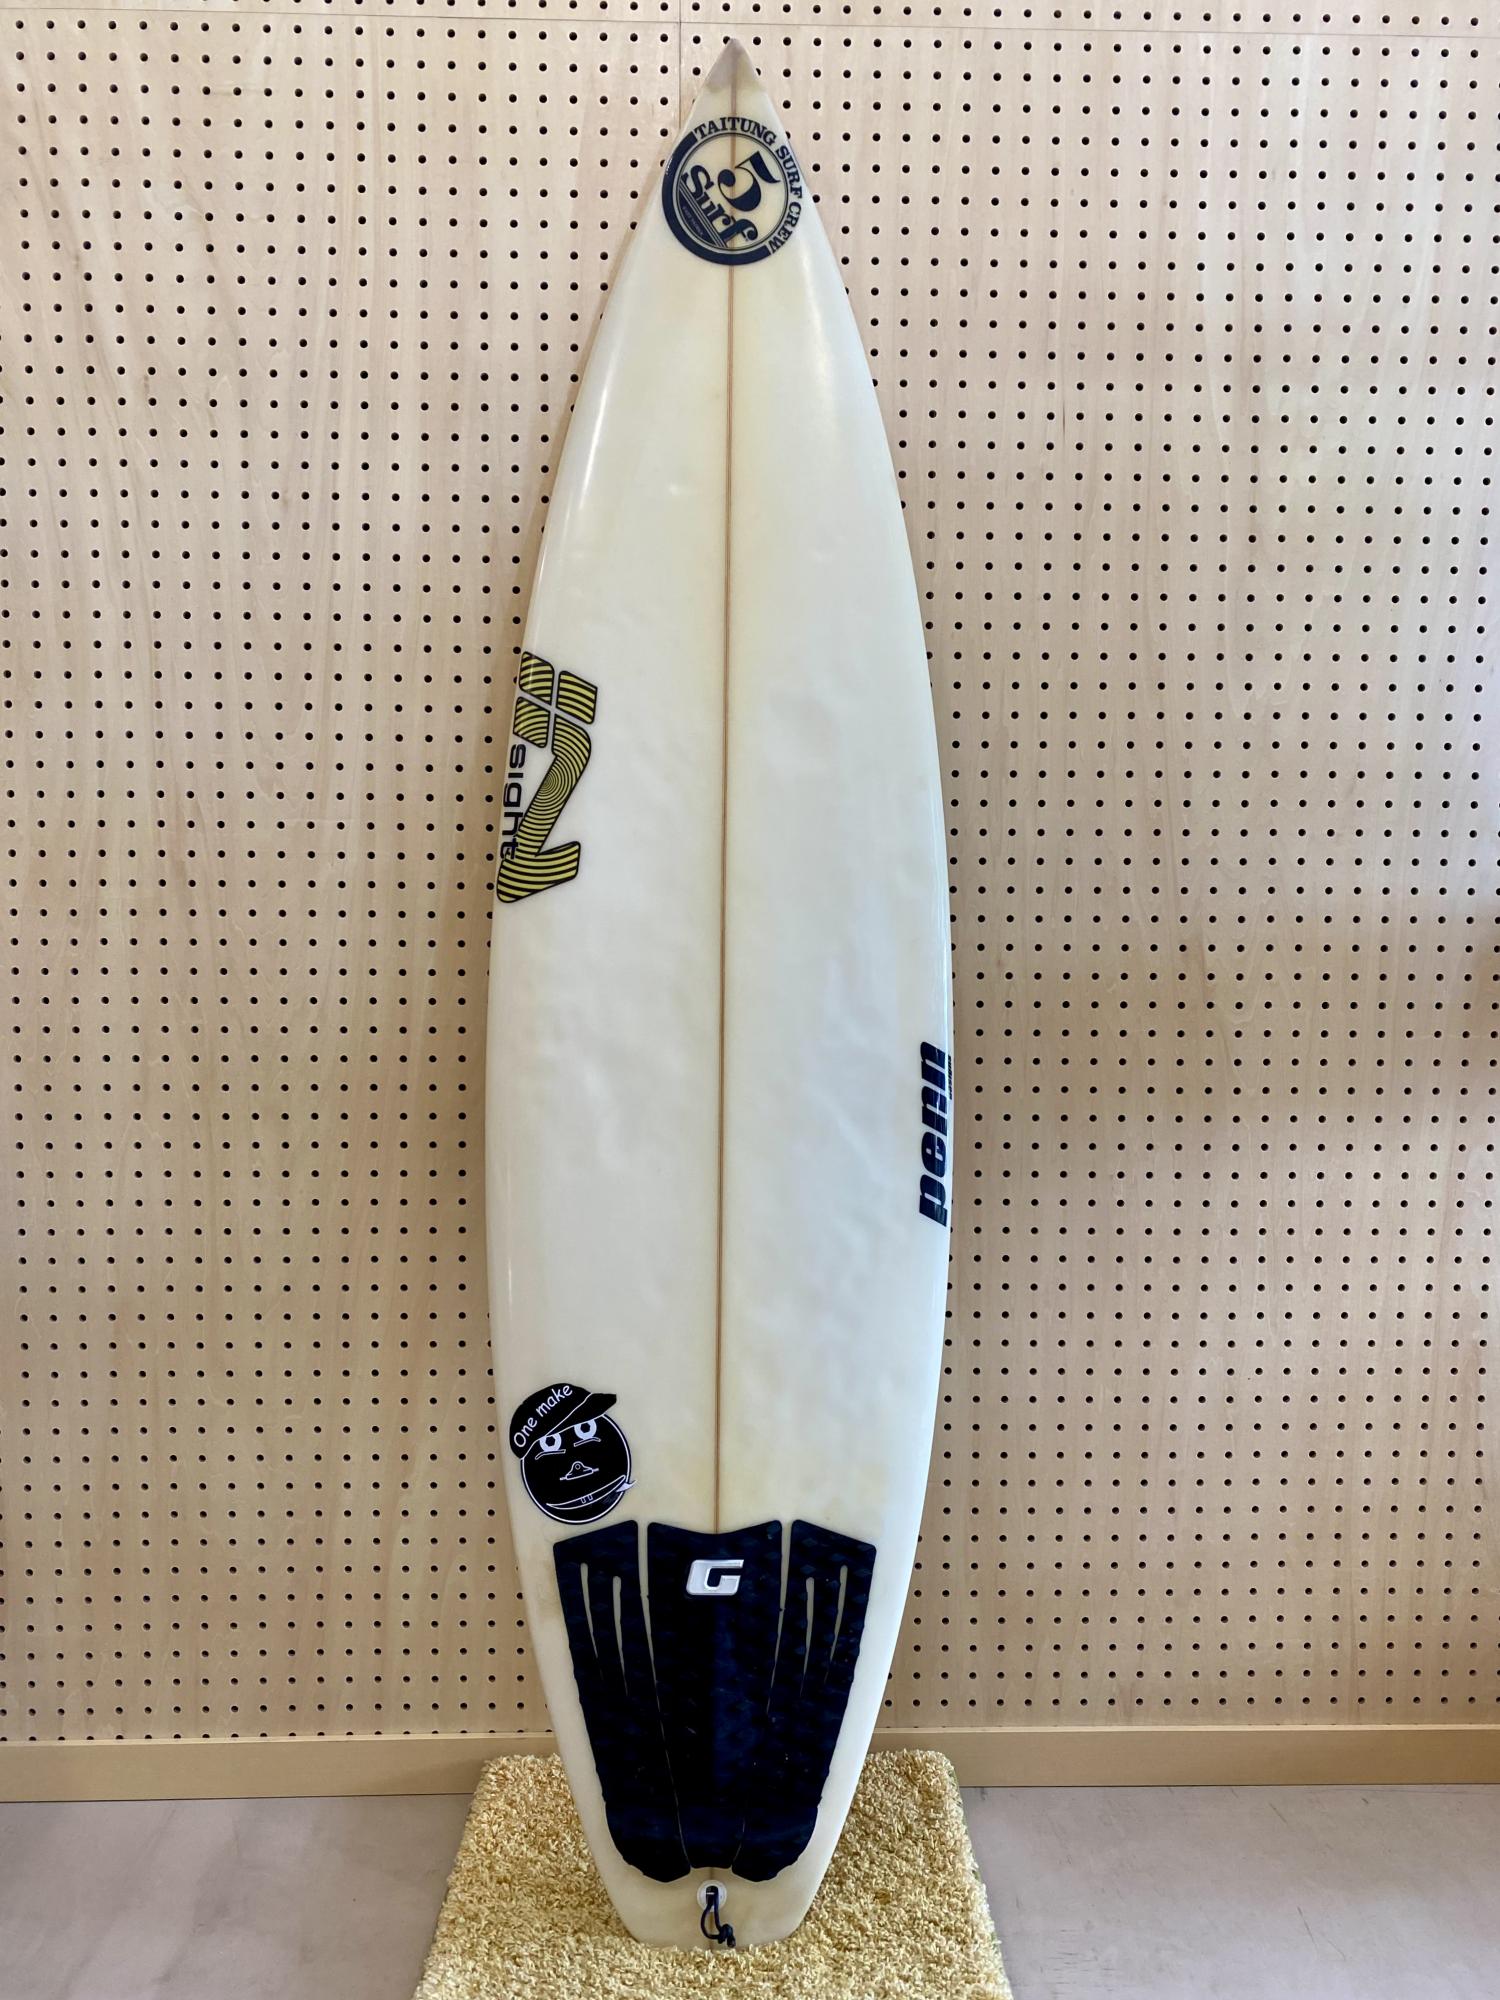 USED (5.11 INSIGHT SURFBOARDS MP-7)